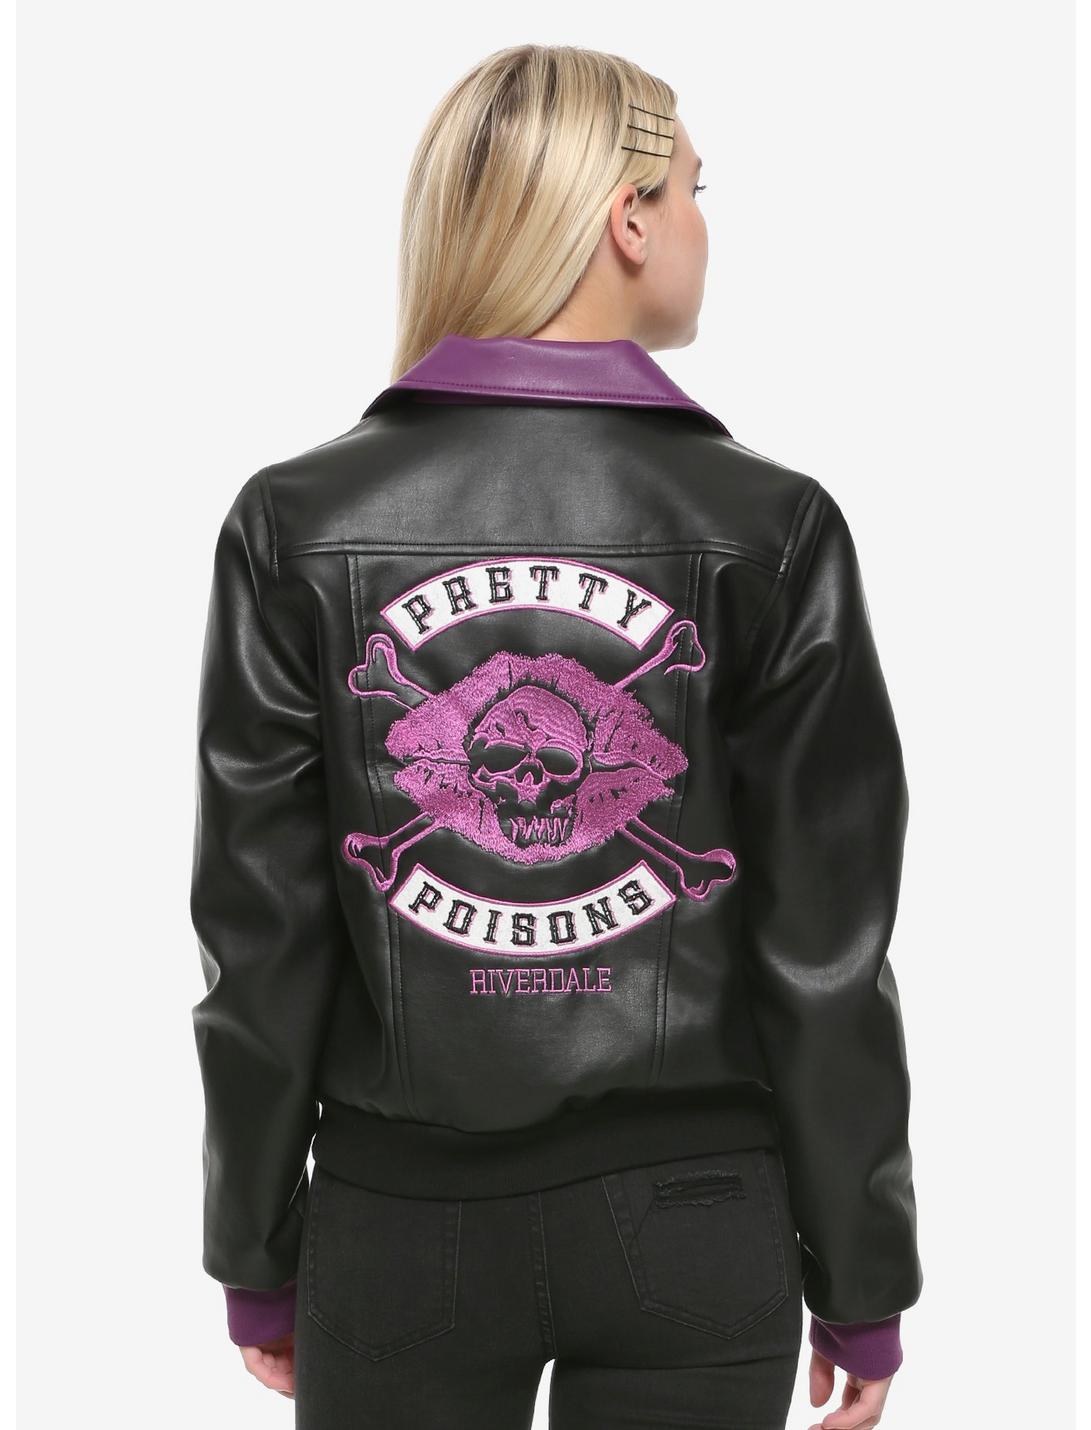 Riverdale Pretty Poisons Faux Leather Girls Jacket, MULTI, hi-res